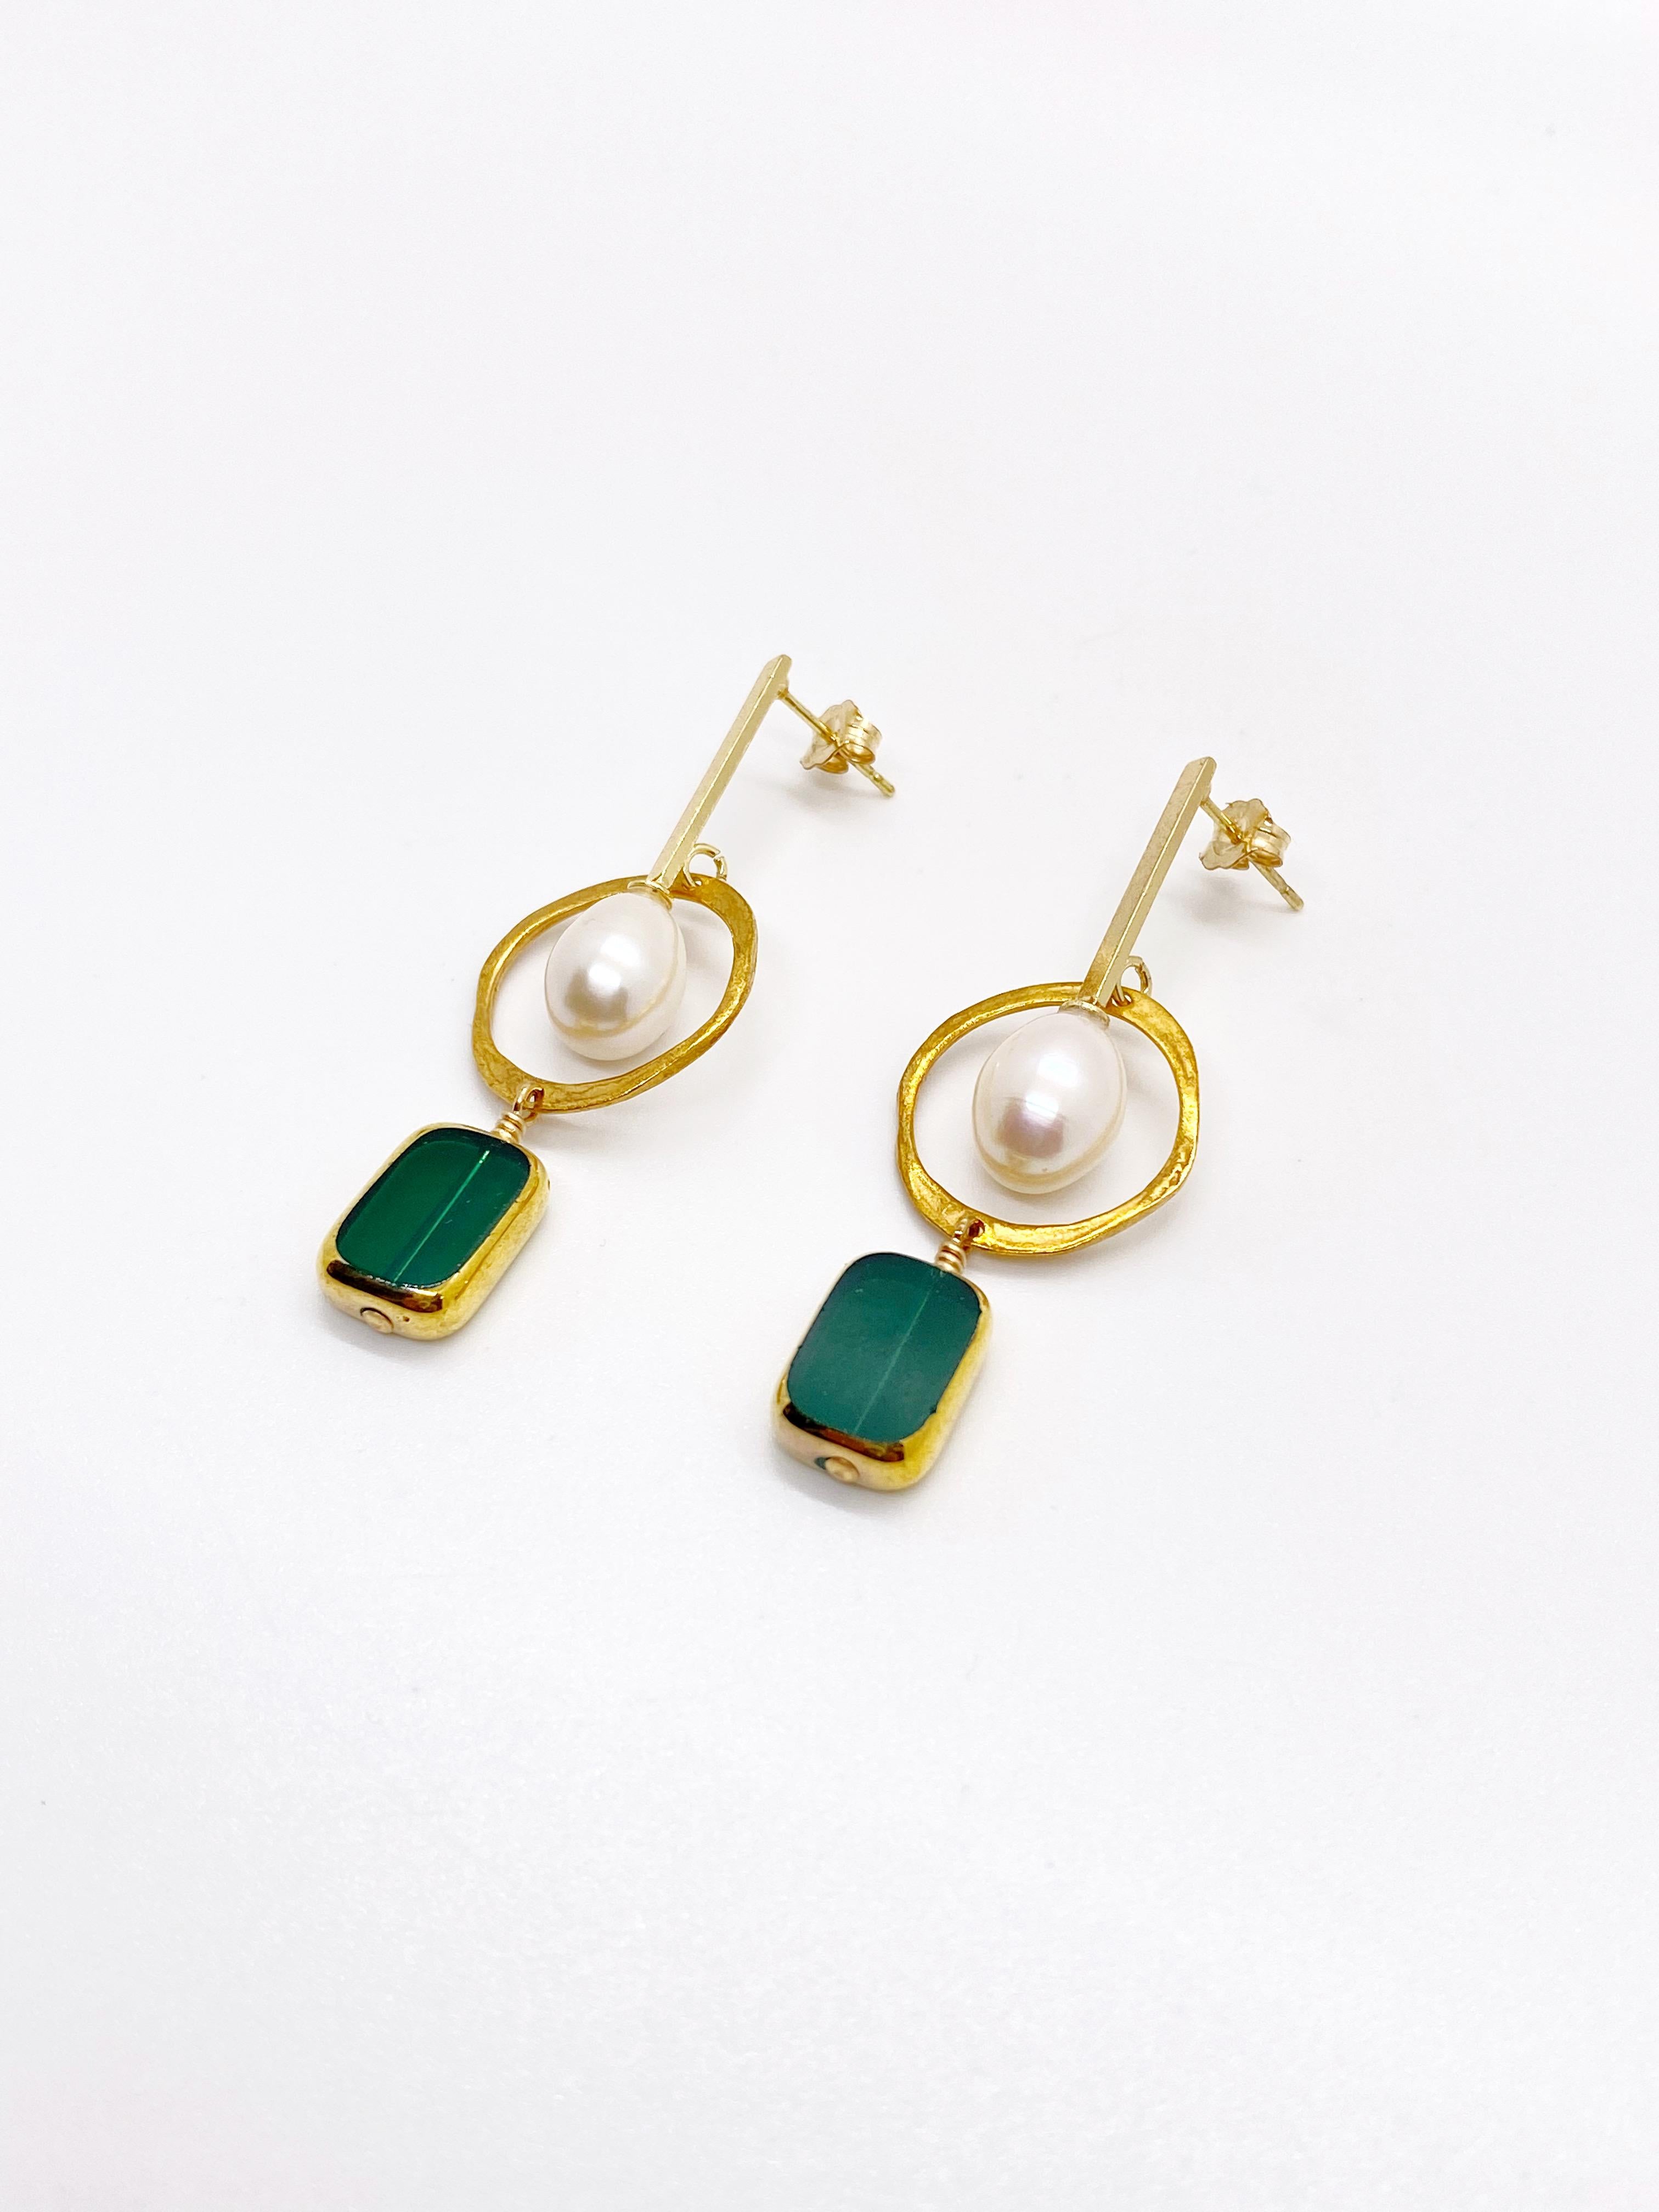 This is for a pair of earrings. These earrings consist of transparent emerald green vintage German glass beads that are edged with 24K gold and a freshwater pearl as the focal point. All metals are 24K gold plated.

The vintage German glass beads